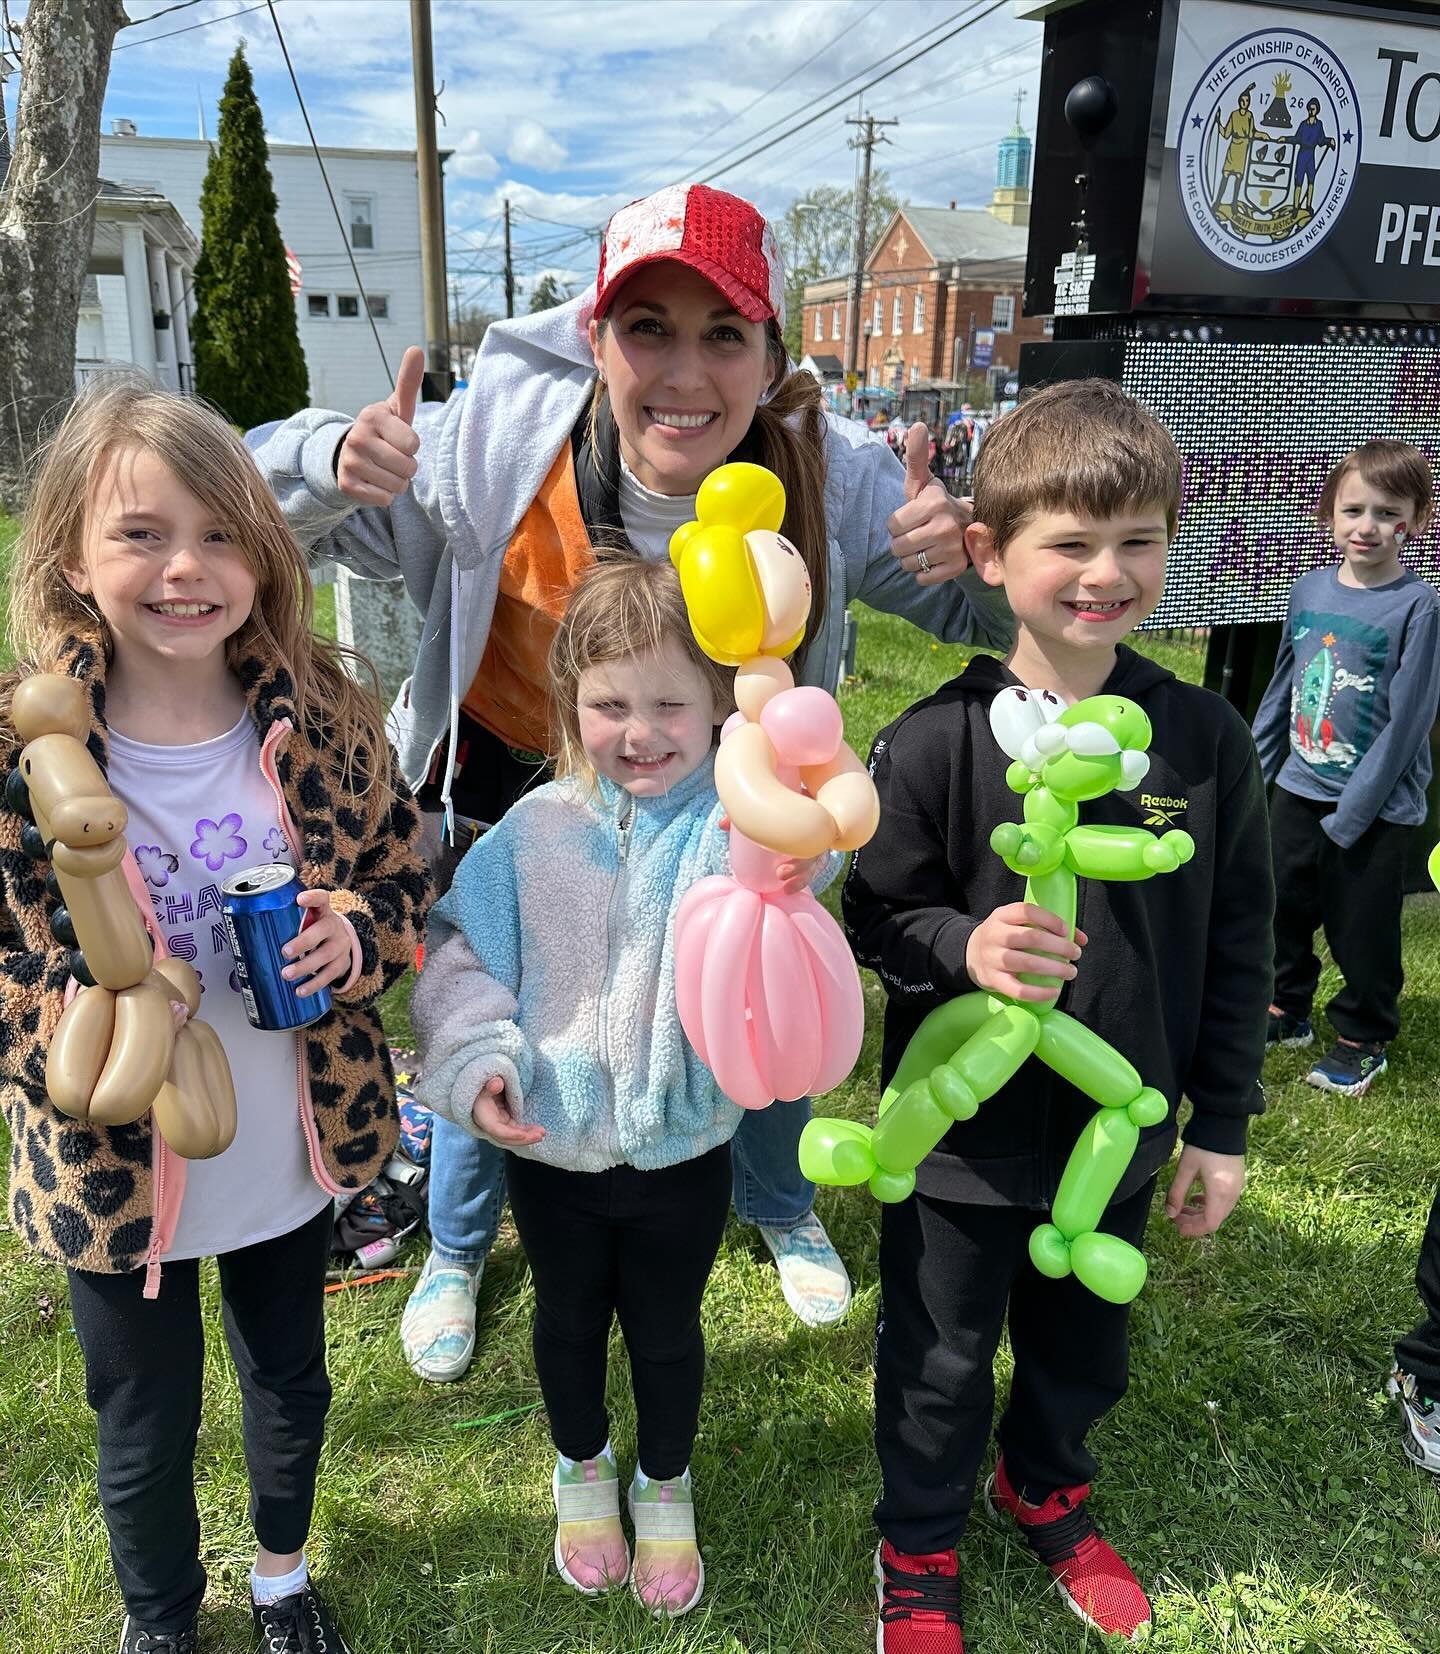 Stilts + balloons is tough combo on a windy day, so my  event today turned into just balloons from the ground, very bundled up! 💨

It is always fun to be at Monroe Twp events! My next one here will be in two weeks on 4/27 at The Autism Awareness Day